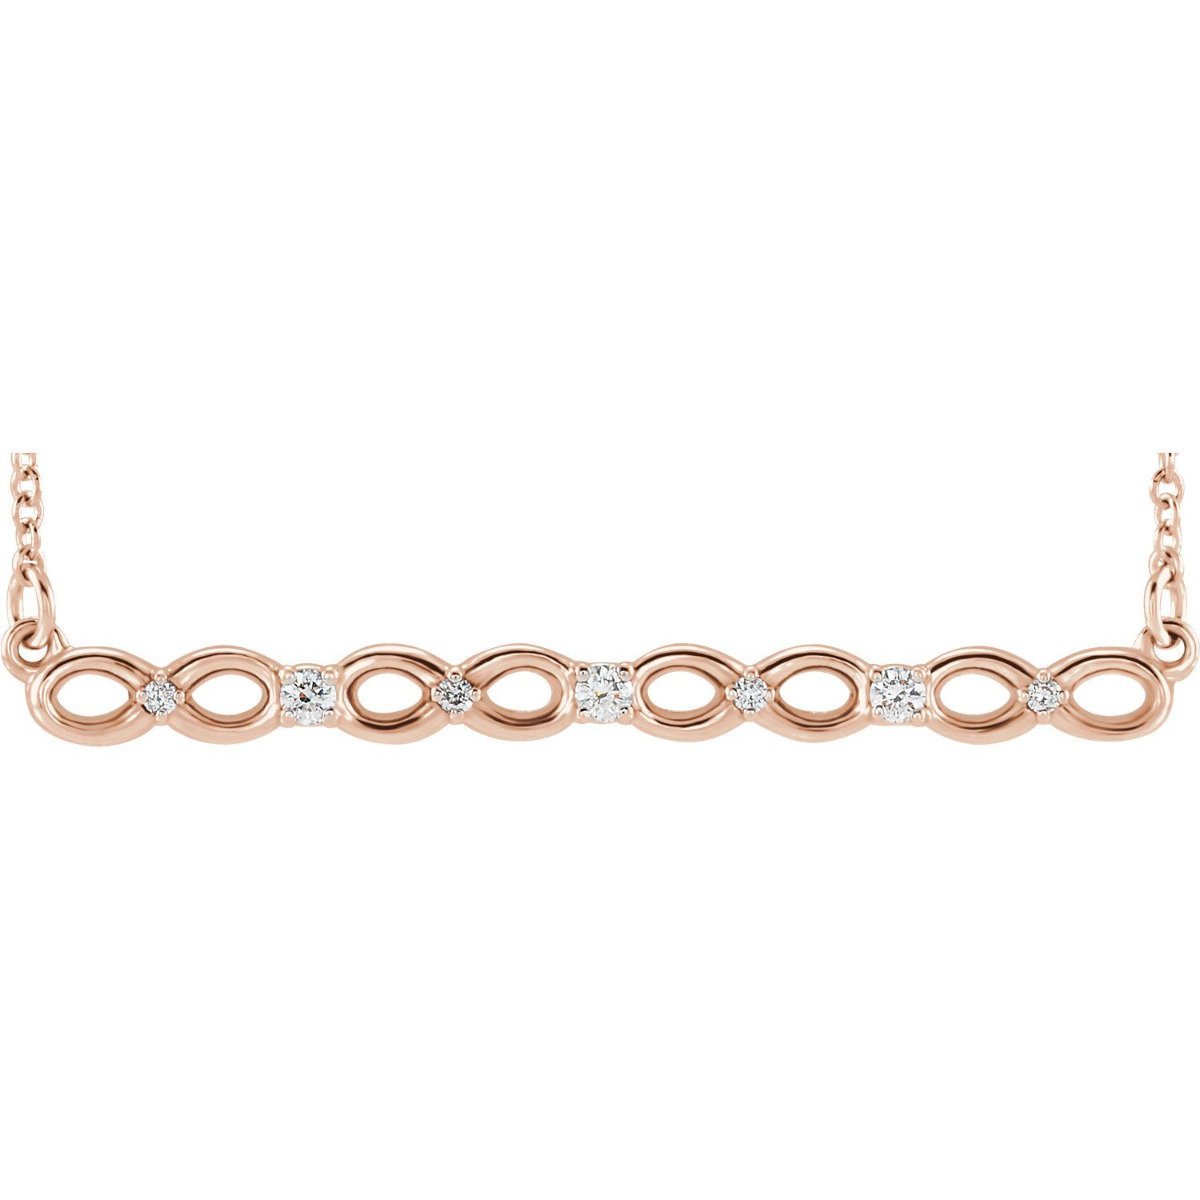 .08 CTW DIAMOND INFINITY-INSPIRED BAR NECKLACE 14KT Gold / Rose